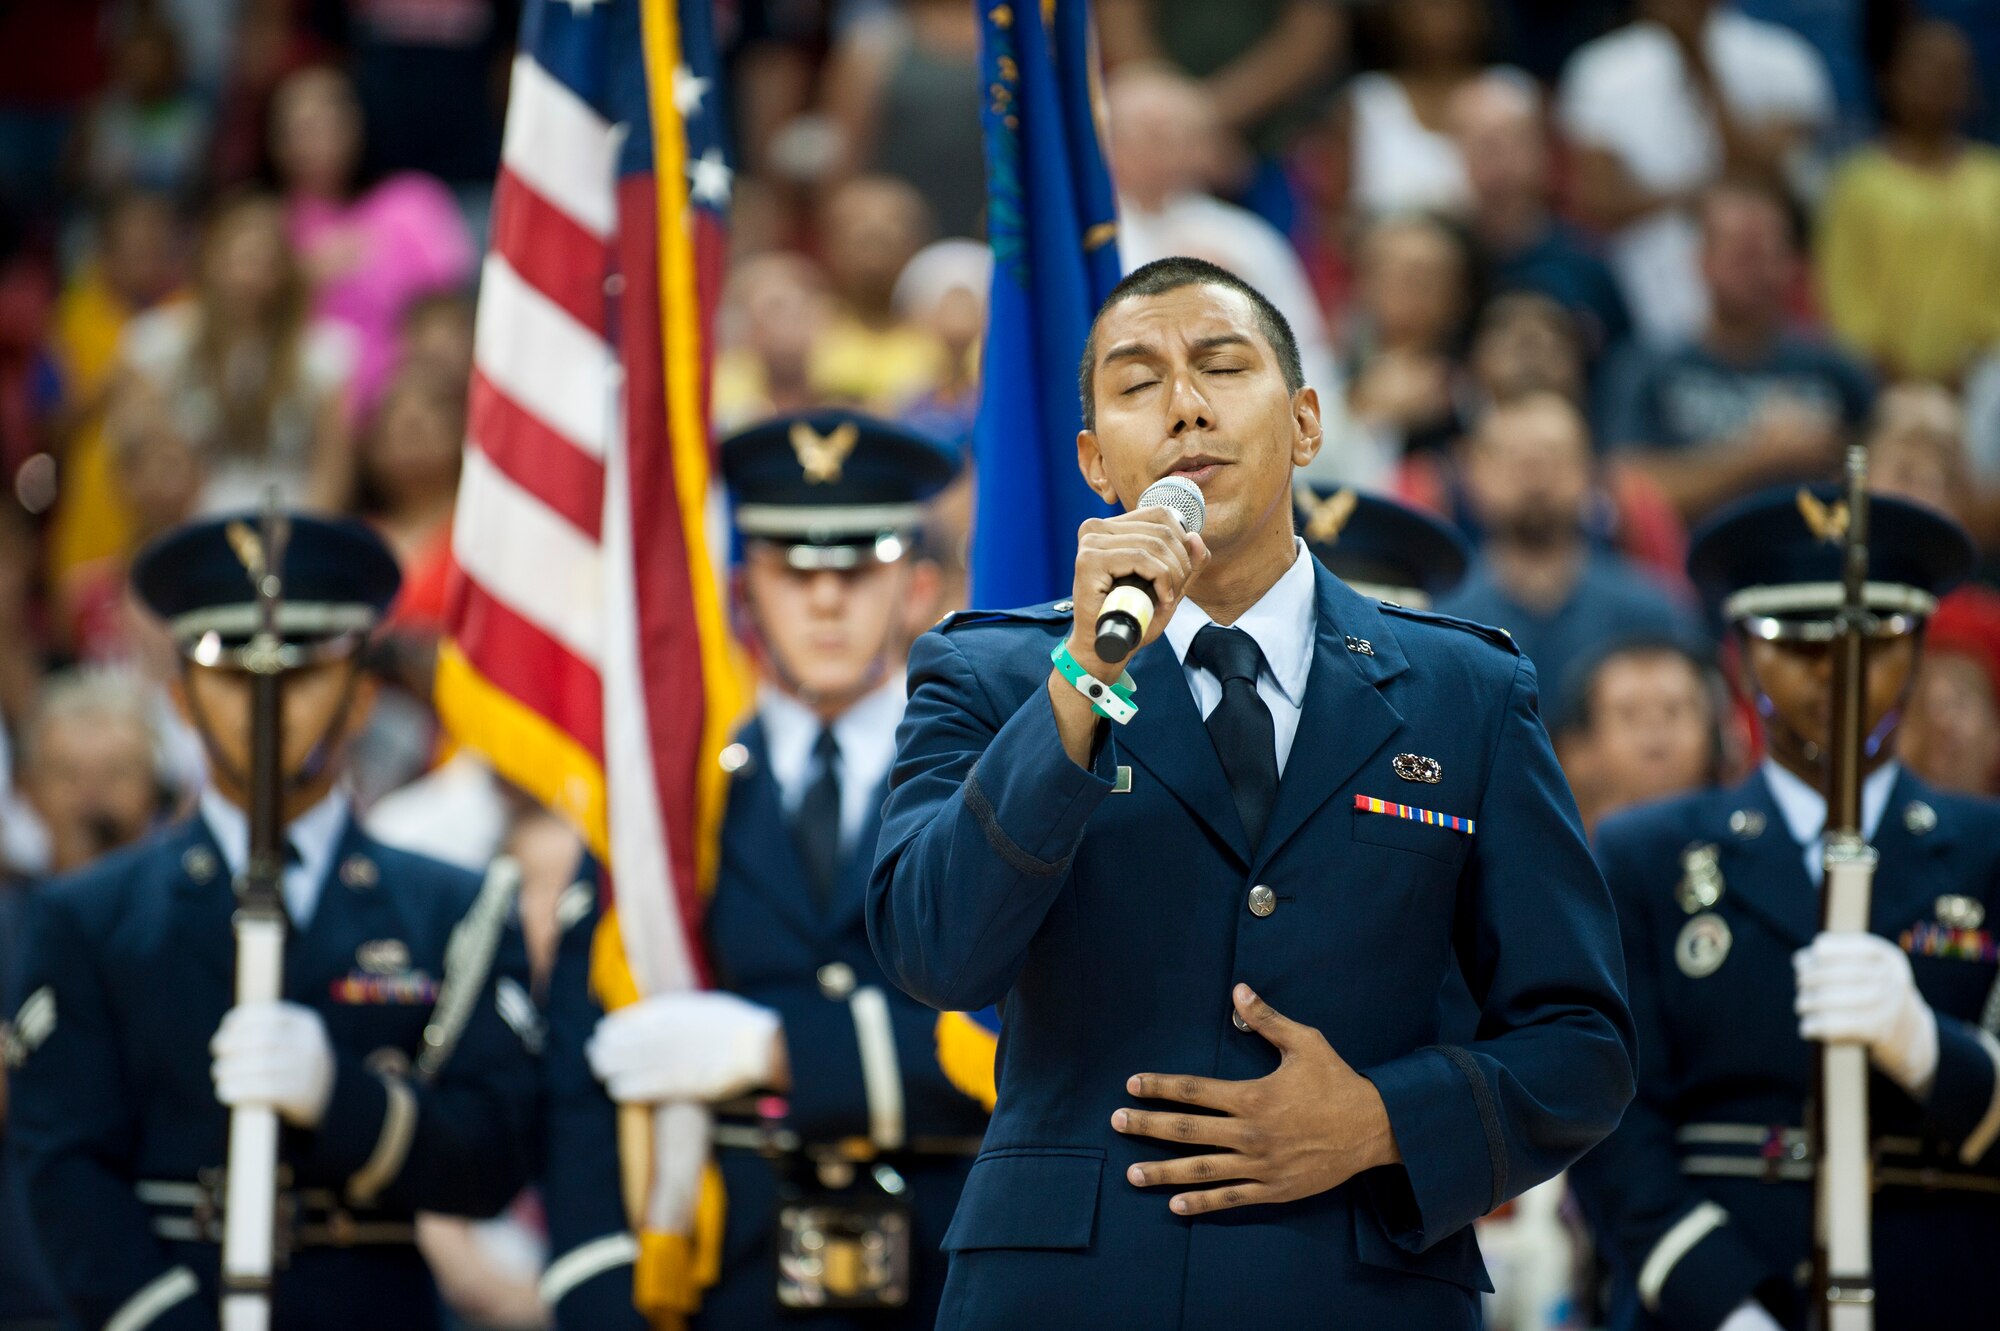 U.S. Air Force 2nd Lt. Daniel Vargas, 757th Aircraft Maintenance Squadron, Aircraft Maintenance Unit assistant officer in charge, sings the National Anthem at the Thomas and Mack Center in Las Vegas, August 1, 2014. Vargas preformed the National Anthem before a USA Basketball Men’s National Team intra-squad scrimmage. (U.S. Air Force photo by Airman 1st Class Thomas Spangler)